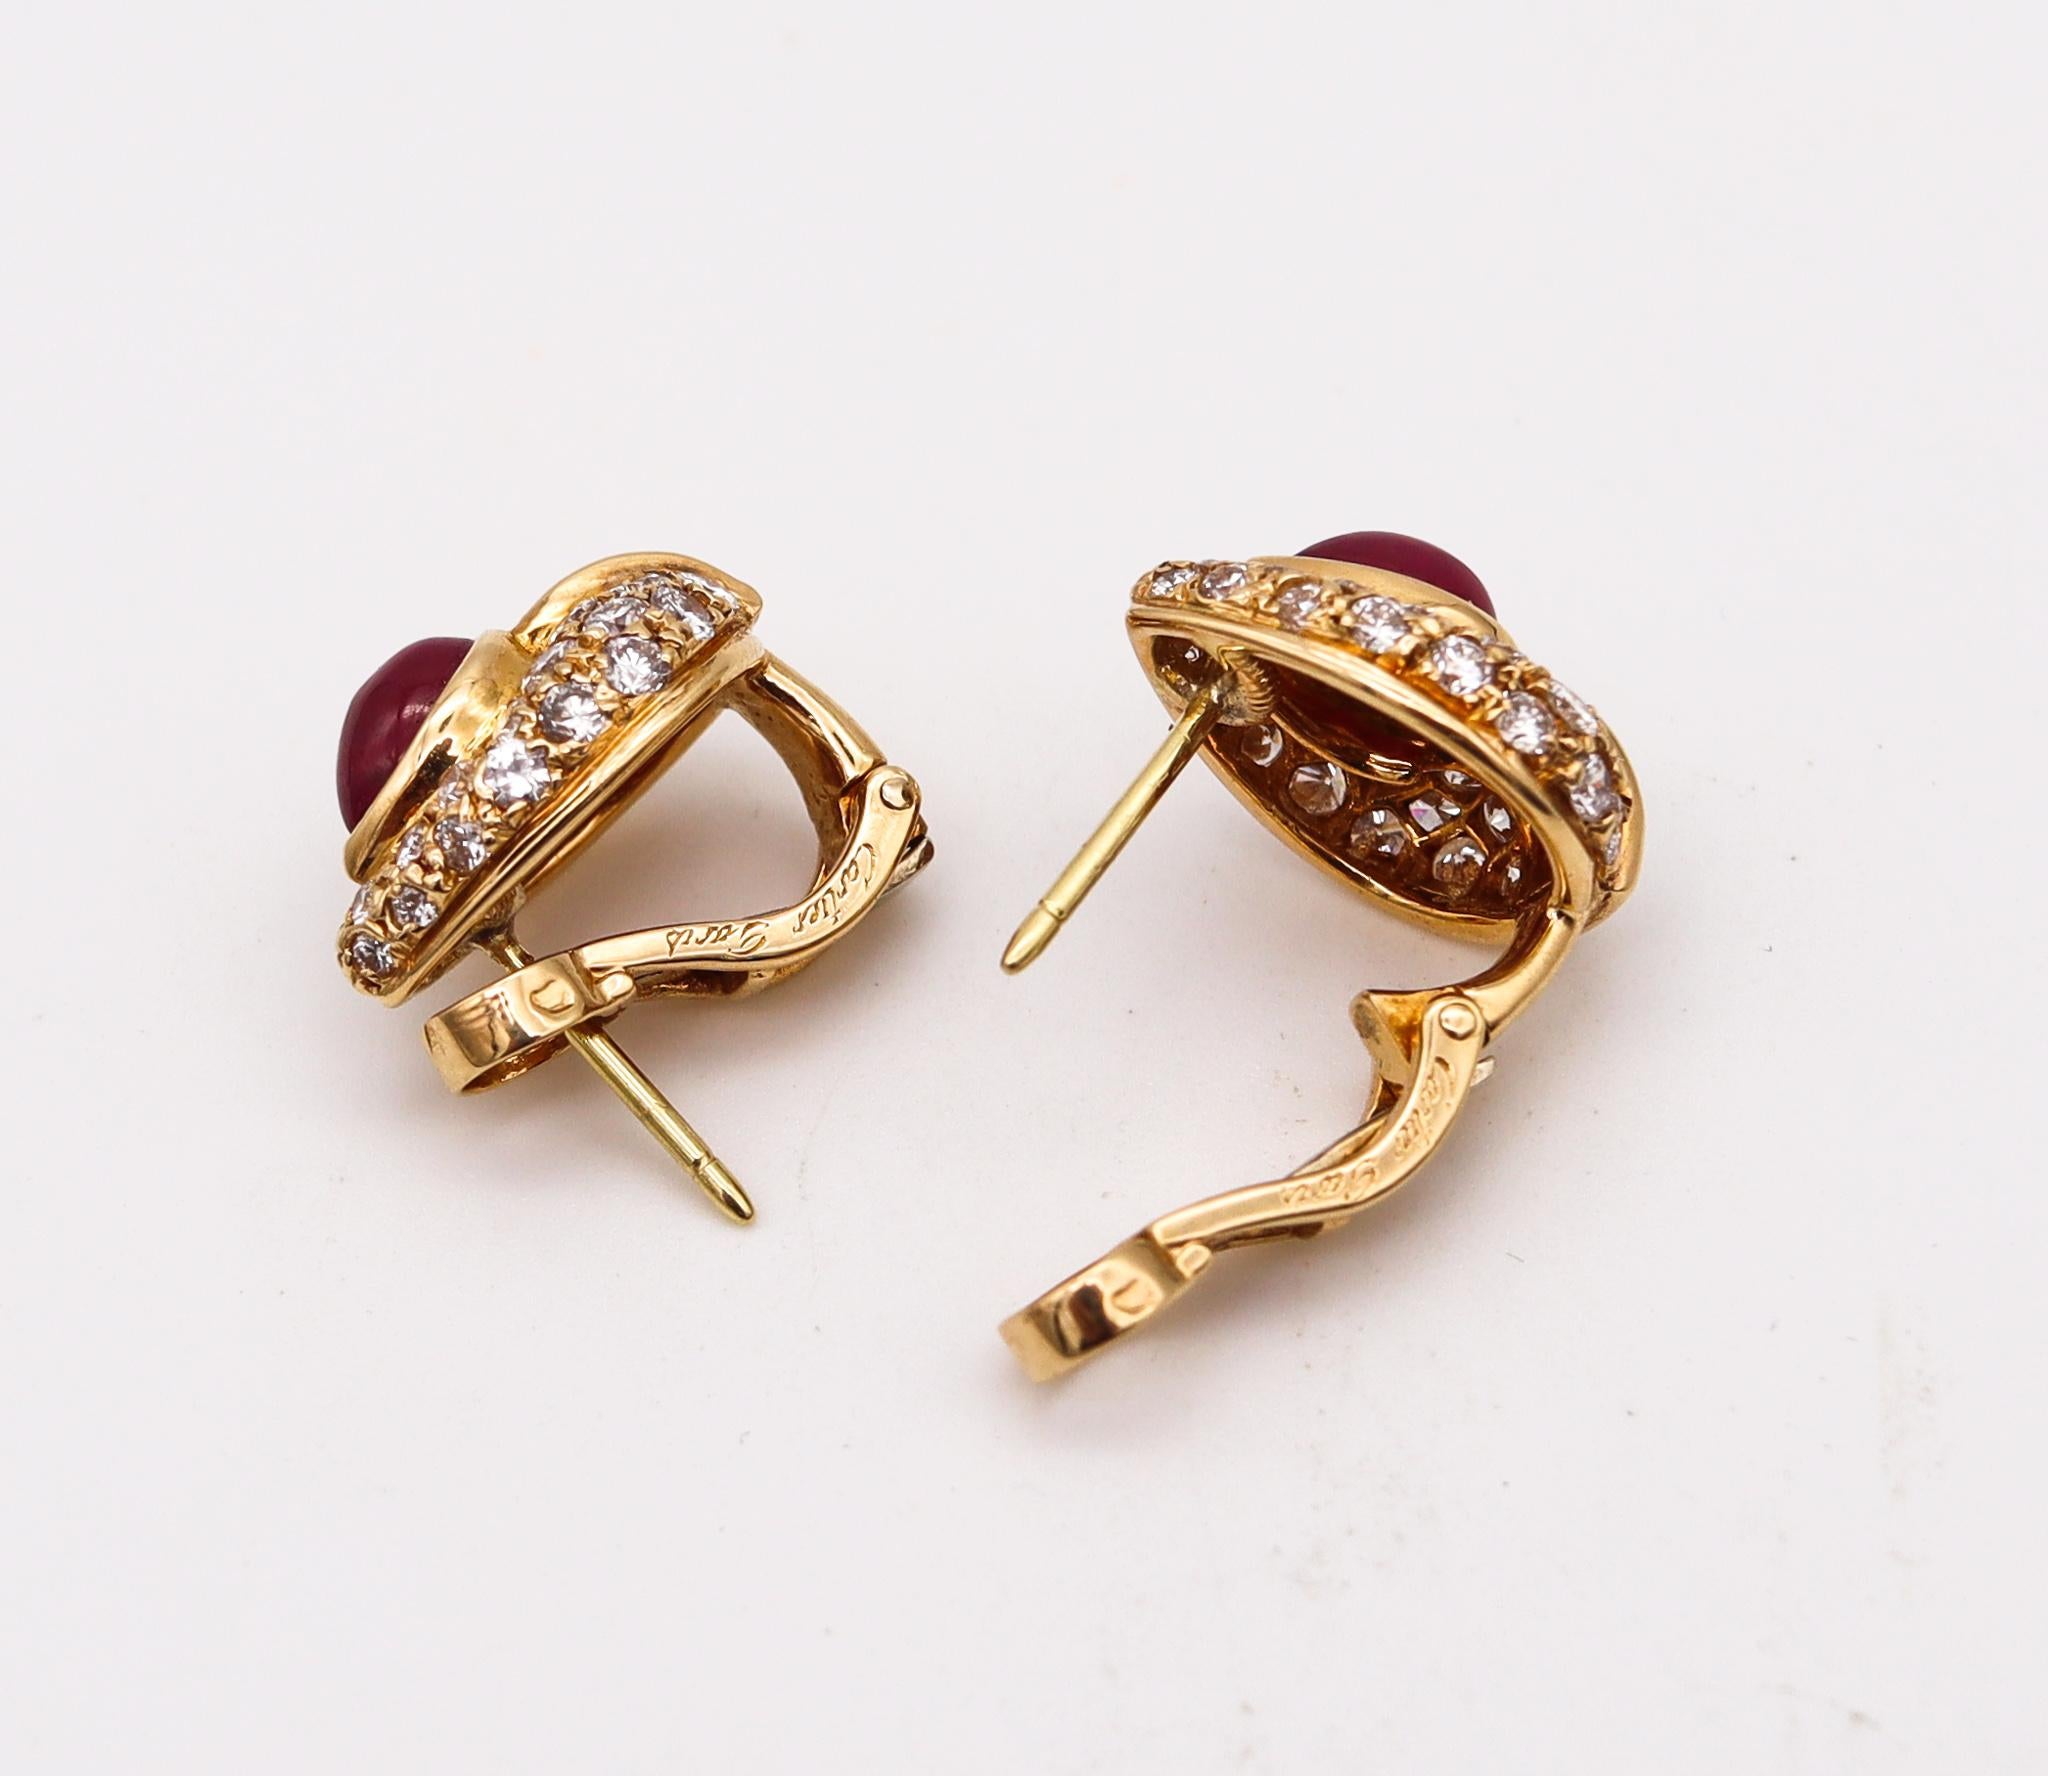 Cabochon Cartier George L'enfant Earrings 18Kt Gold 5.44 Cts of Burmese Rubies & Diamonds For Sale